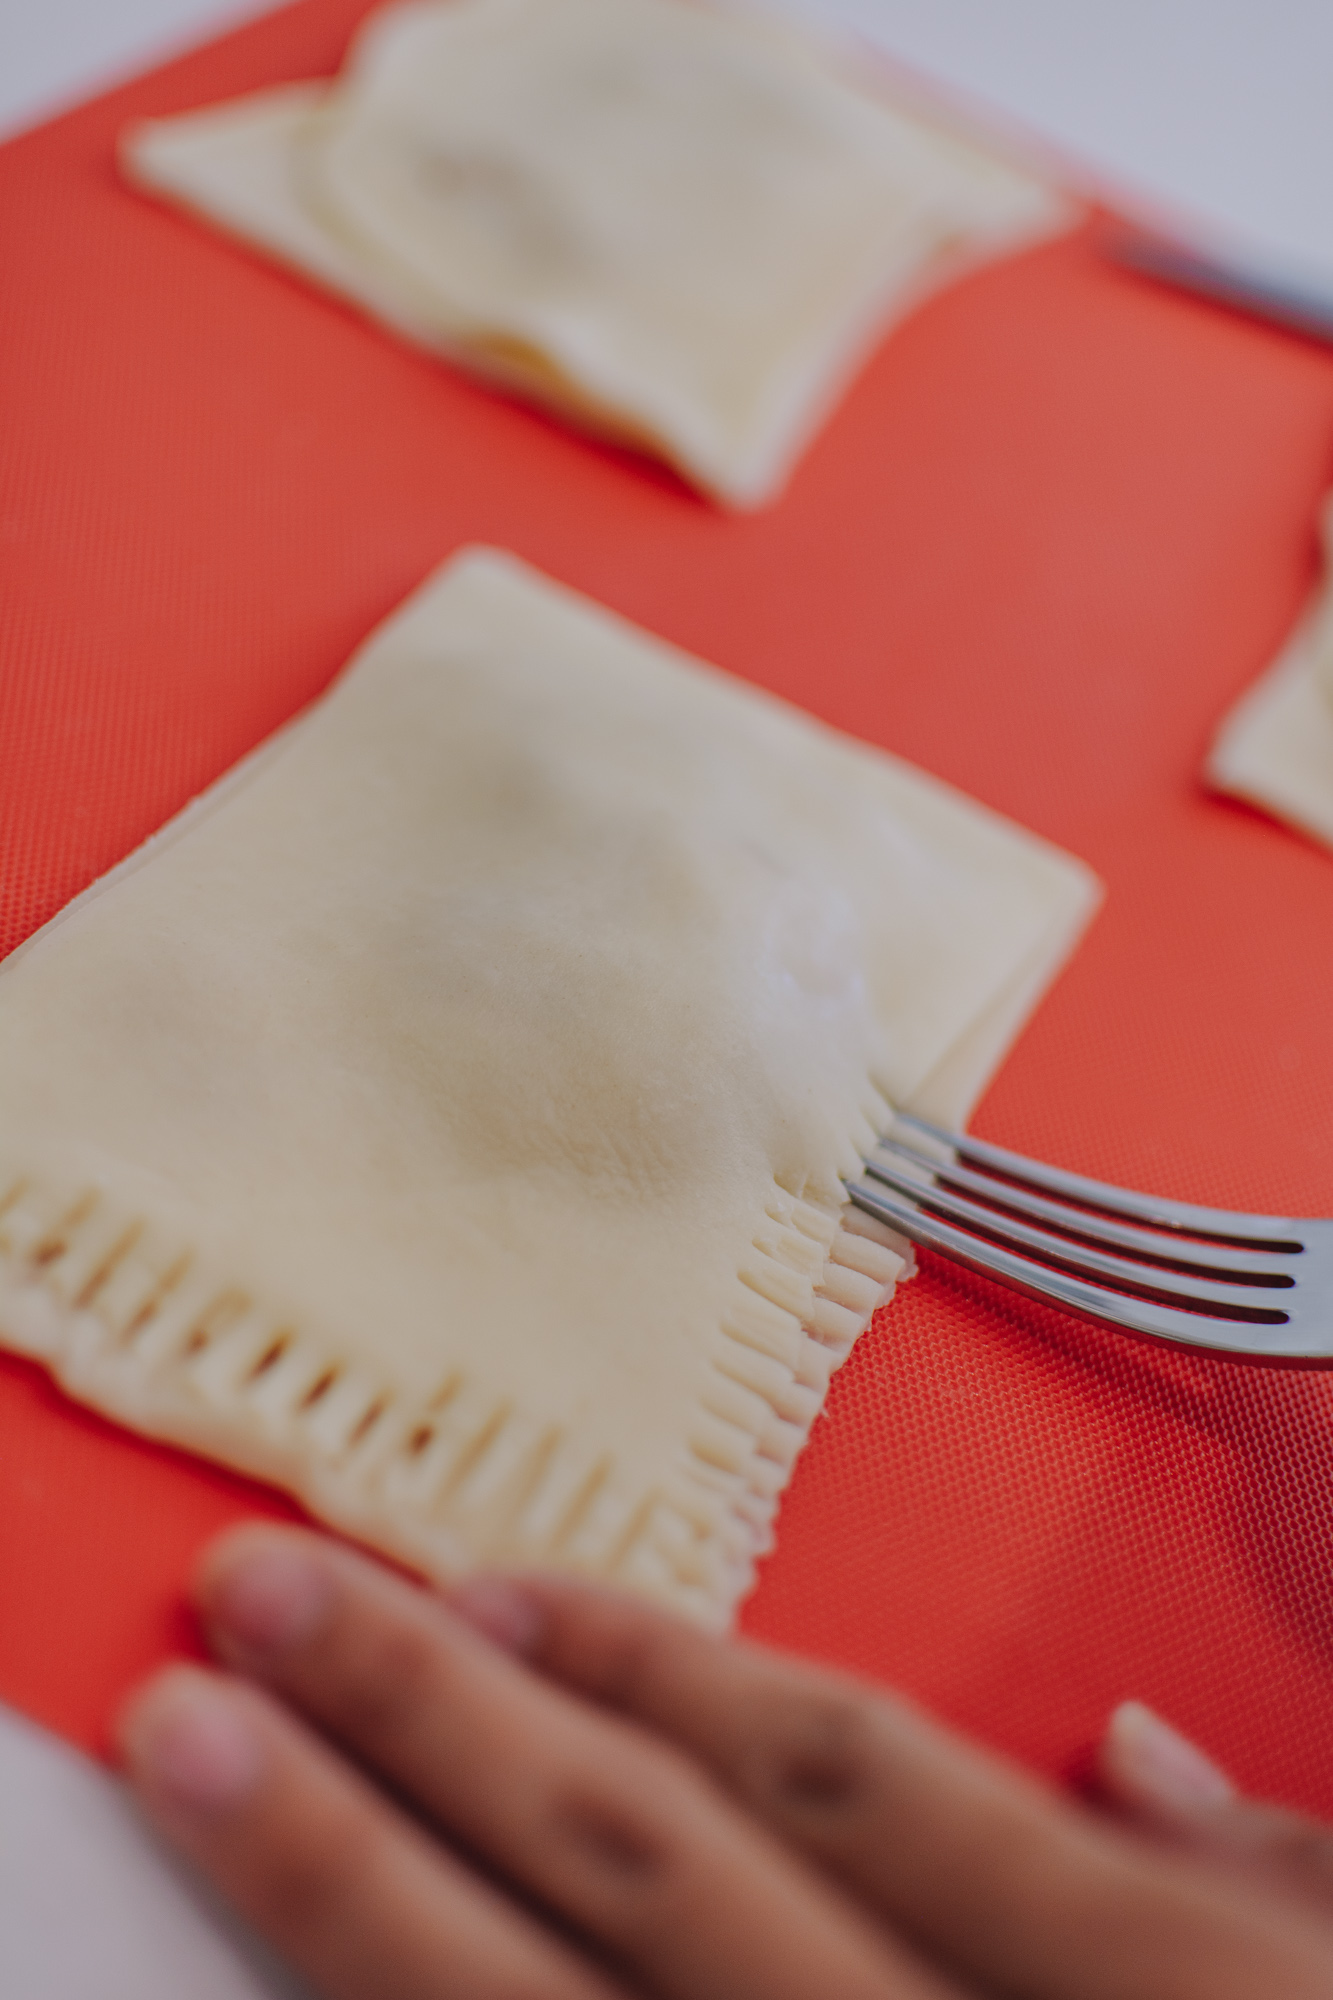 Arizona blogger Demi Bang uses a fork to make the ridges on the toaster pastries.